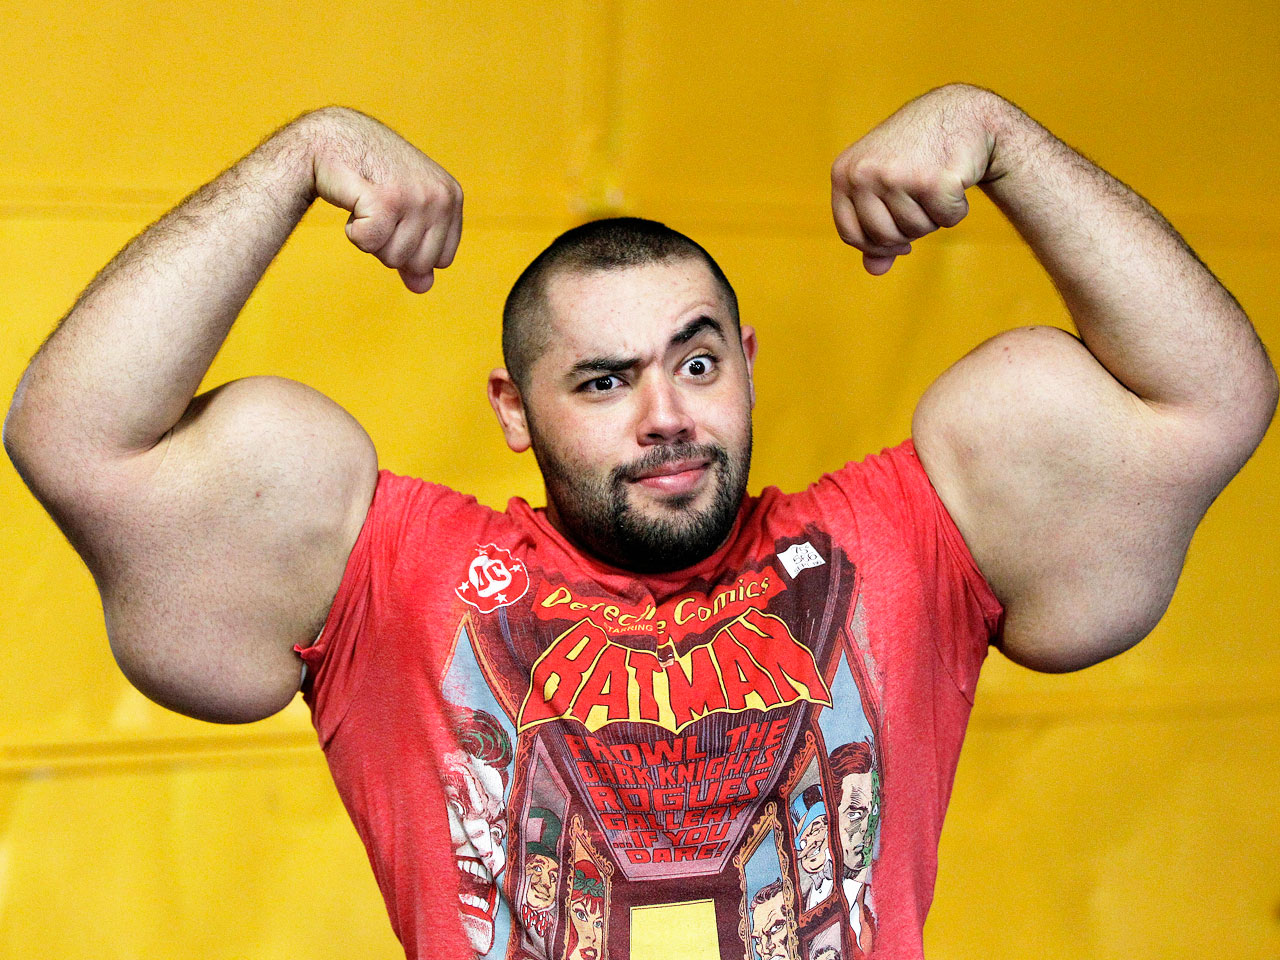 In this photo taken, Friday, Nov. 16, 2012, Egyptian Body builder Moustafa Ismail poses during his daily workout at World Gym in Milford, Mass. Ismail has been given the title of world's biggest arms, biceps and triceps, by the Guinness Book of World Records. (AP Photo/Stephan Savoia)